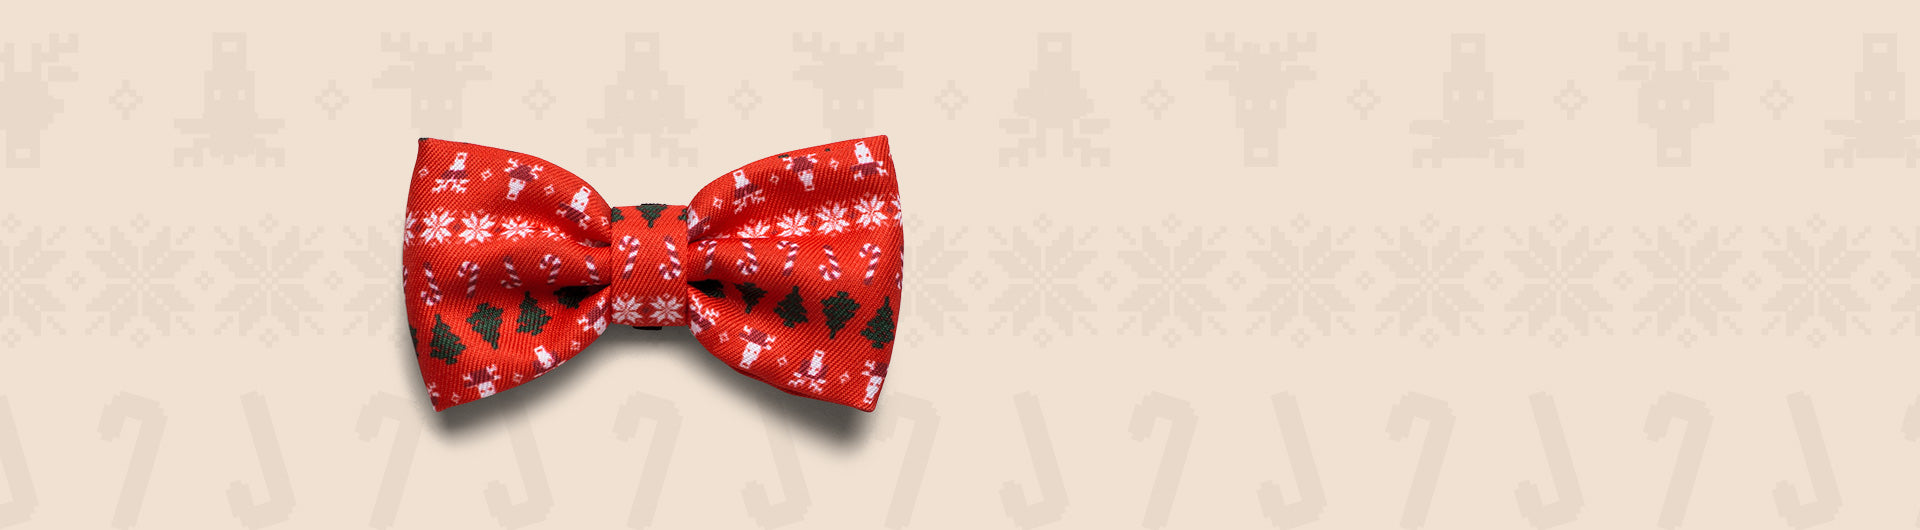 Rudolph | Dog Bow Tie | Christmas Limited Edition